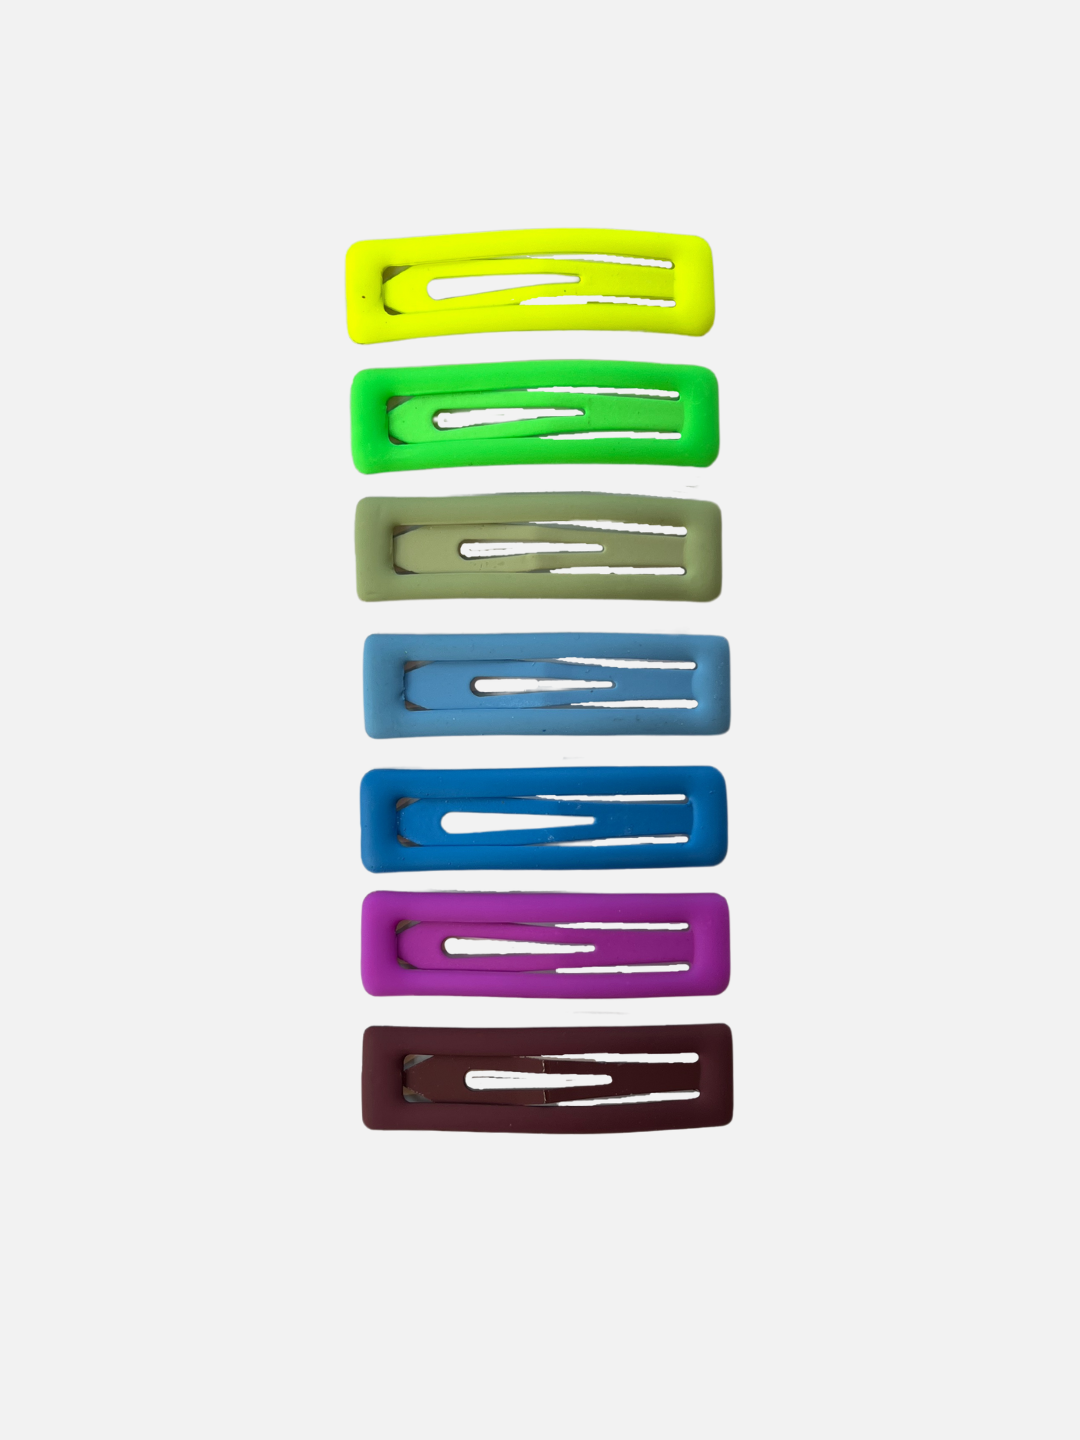 Seven rainbow snap clips for kids - yellow, bright green, olive green, muted blue, blue, purple, burgundy. 